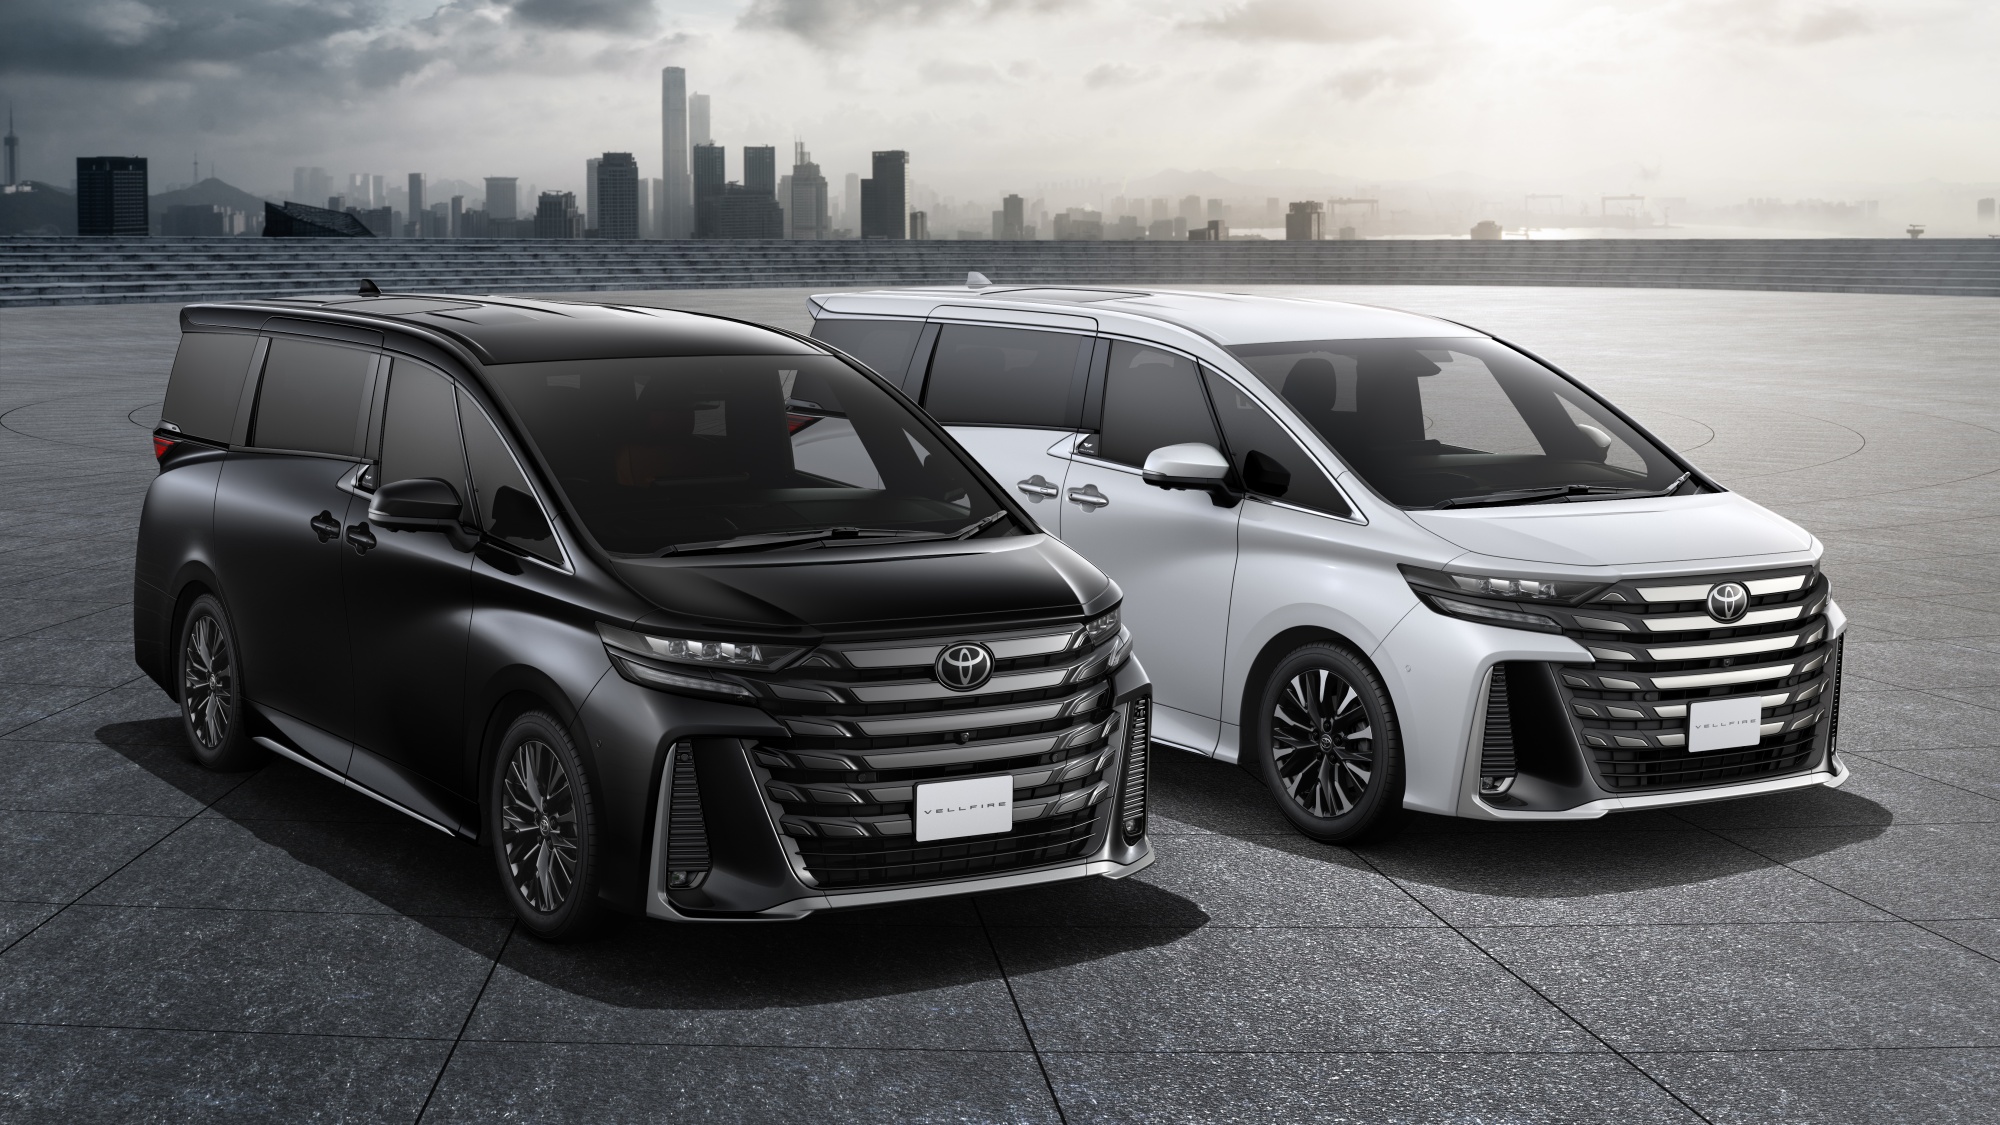 Toyota Updates Luxury Alphard and Vellfire Models With New Look